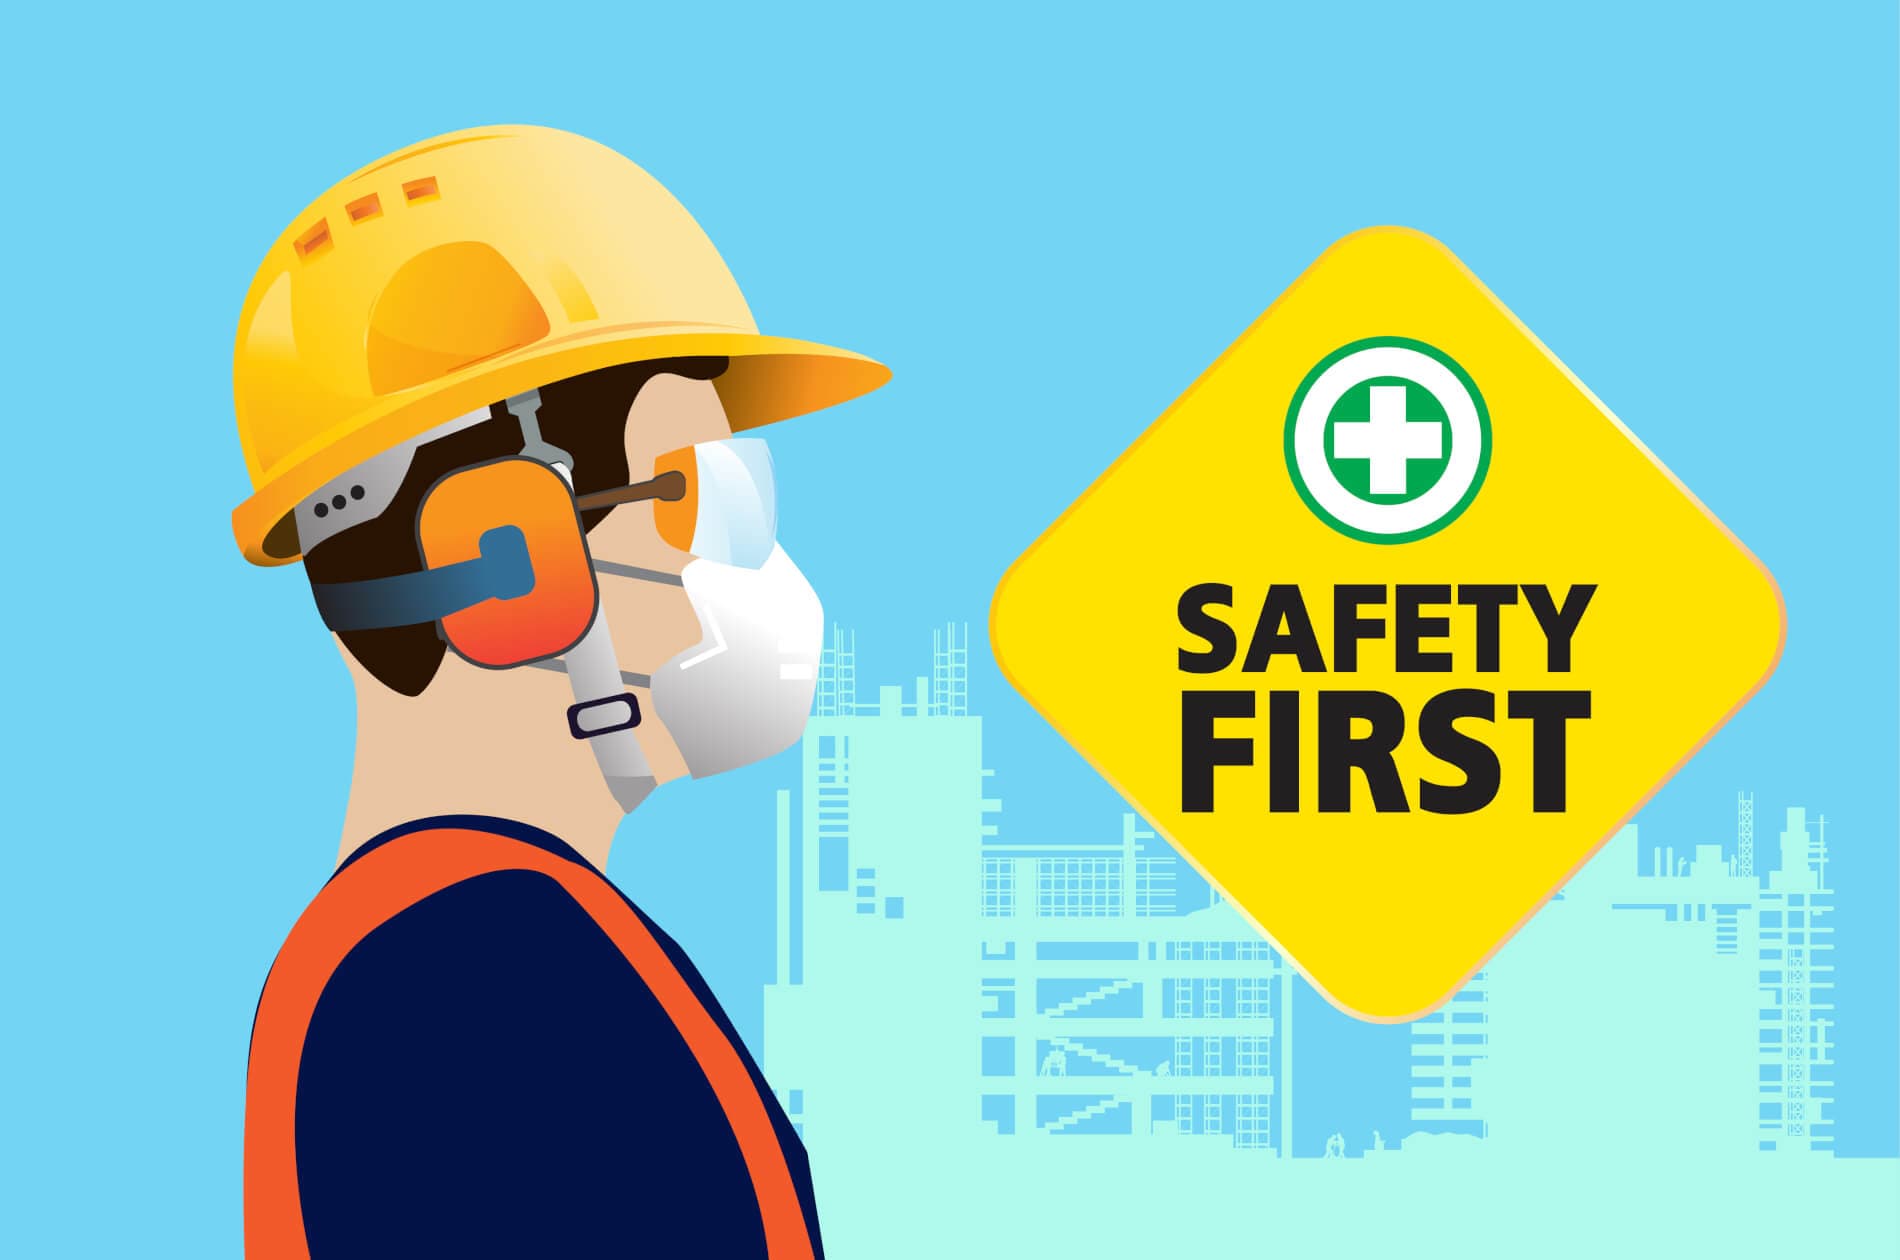 Safety audits 101: What are they, and why does your workplace need them?